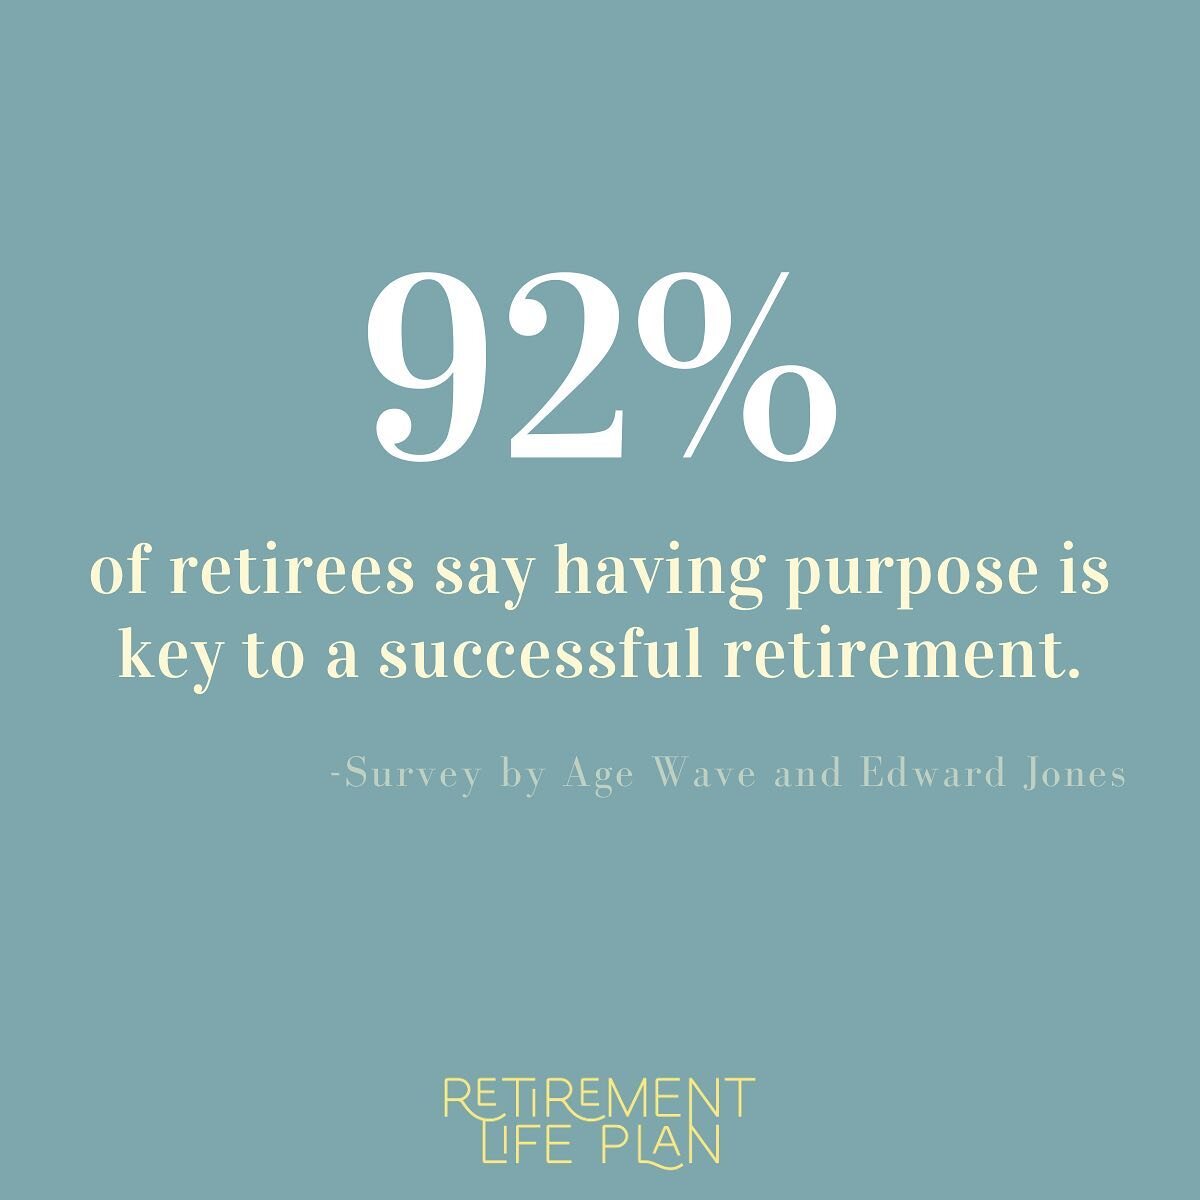 It is becoming more and more clear that we need to plan beyond finances for retirement life. Finances are a critical part of this planning, but they are far from the whole story. 
🍍
The topic of purpose comes up in most discussions of retirement lif